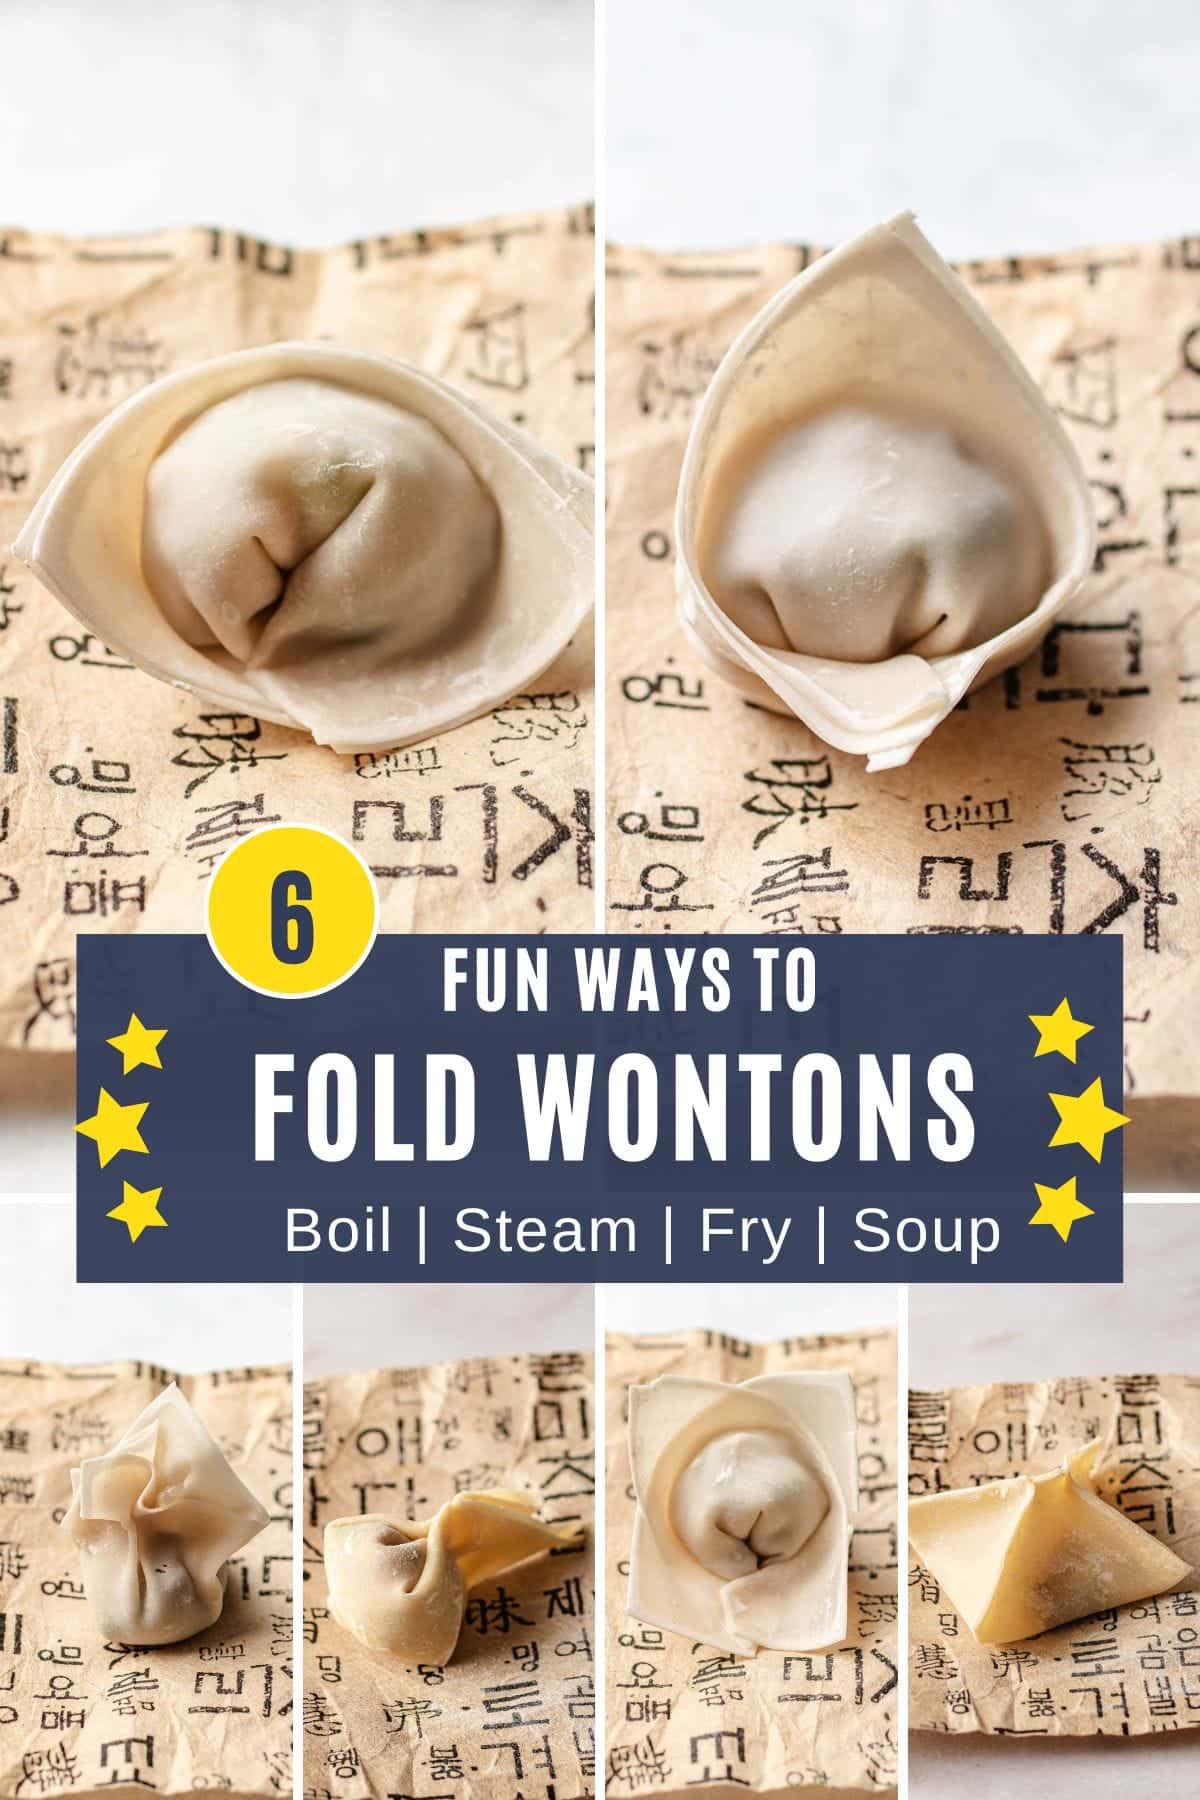 Feature image shows different ways to fold wontons.